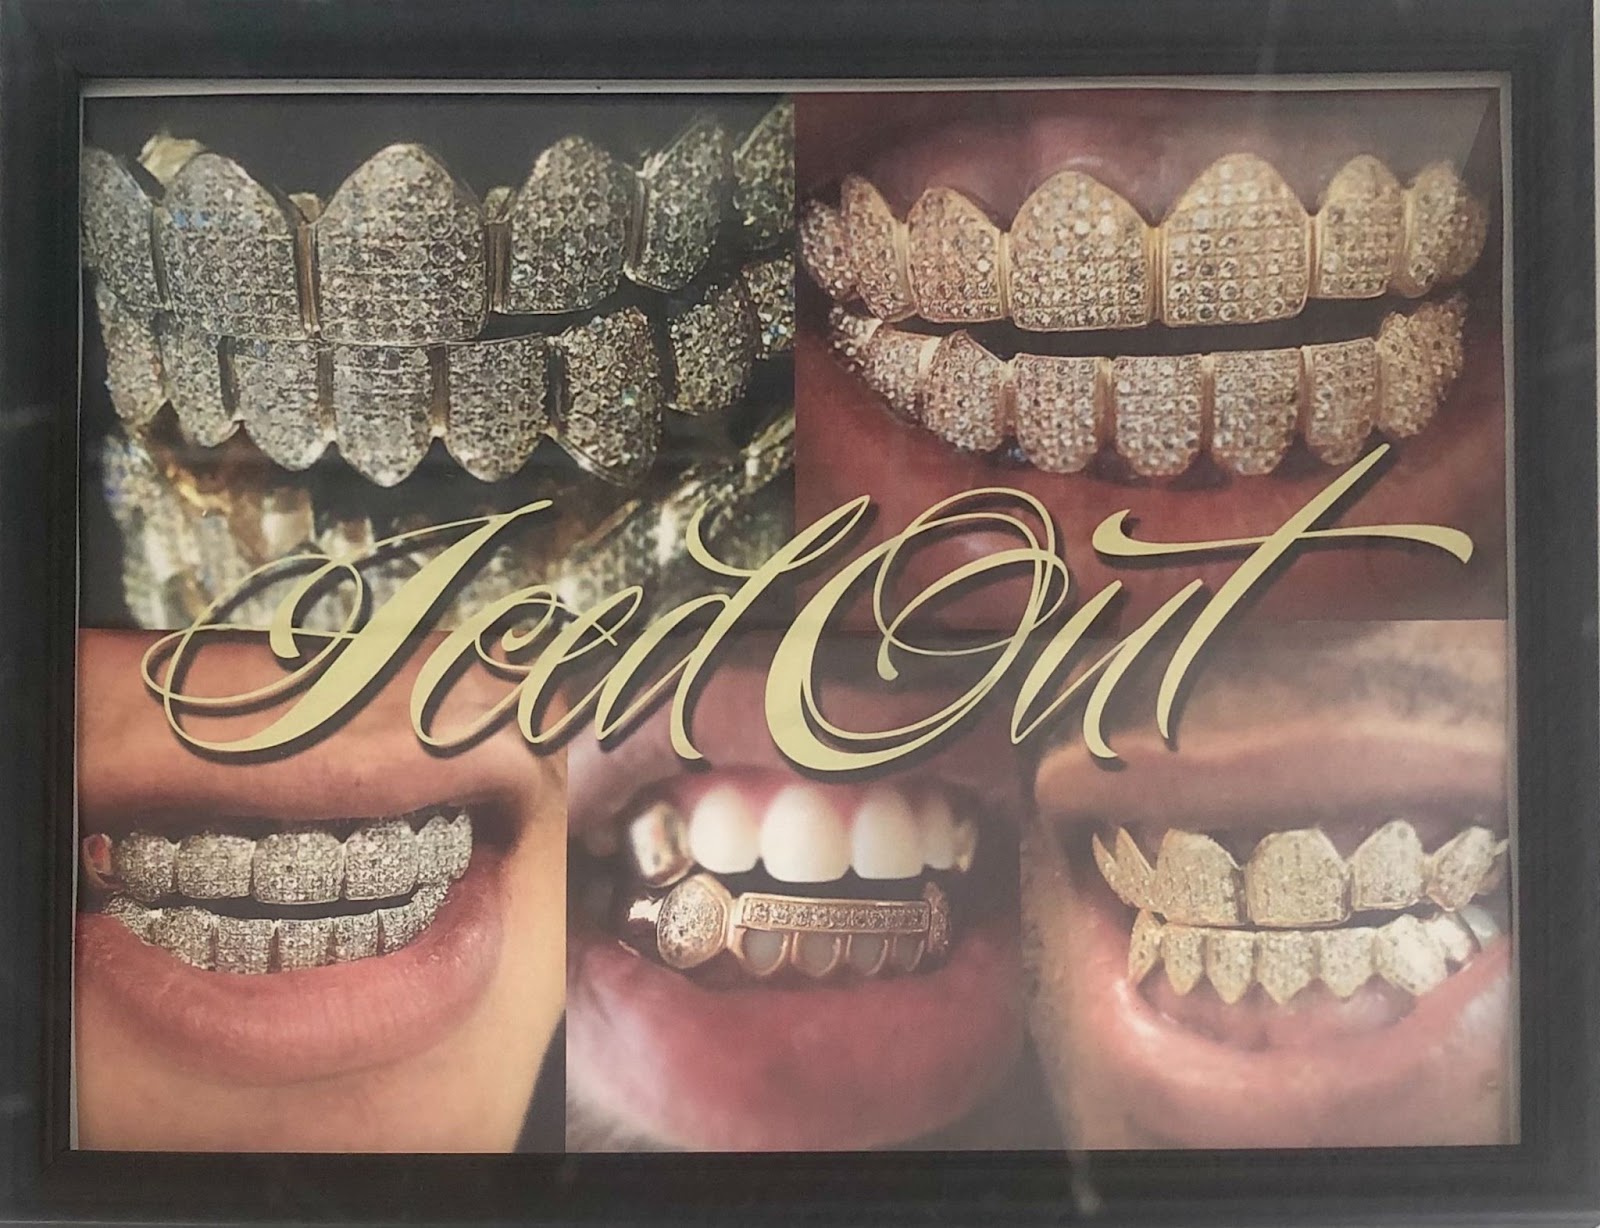 Richmond earning popularity for grillz as new dental jewellery store adds solutions